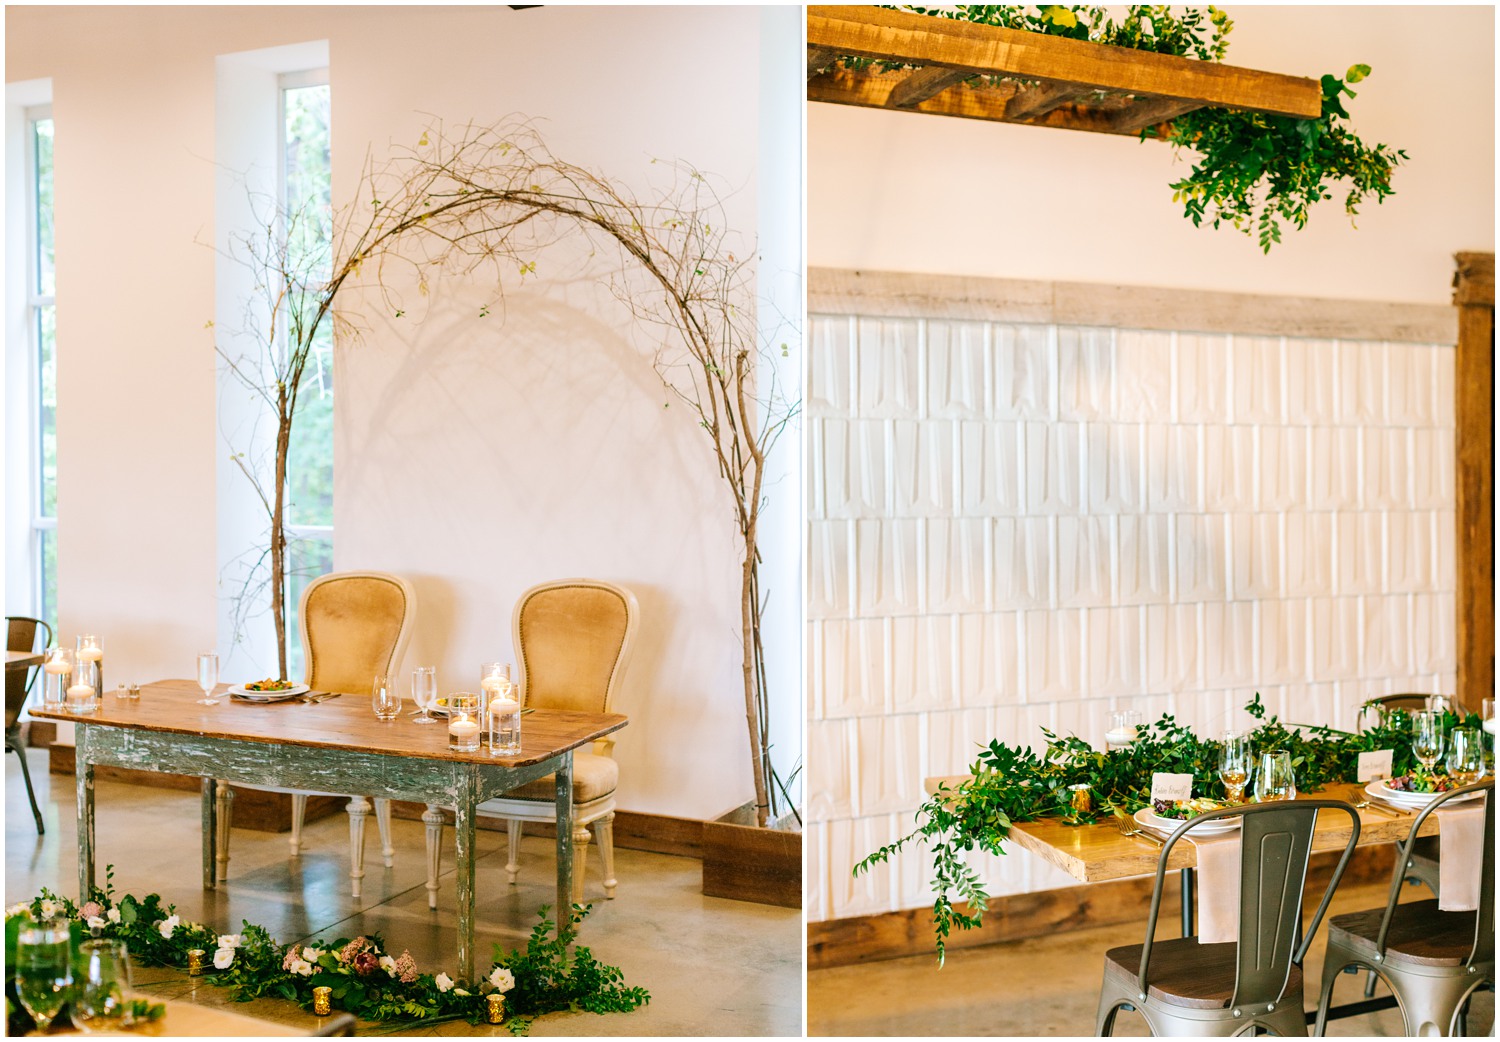 sweetheart table with rustic arch and guest table with greenery draped along middle